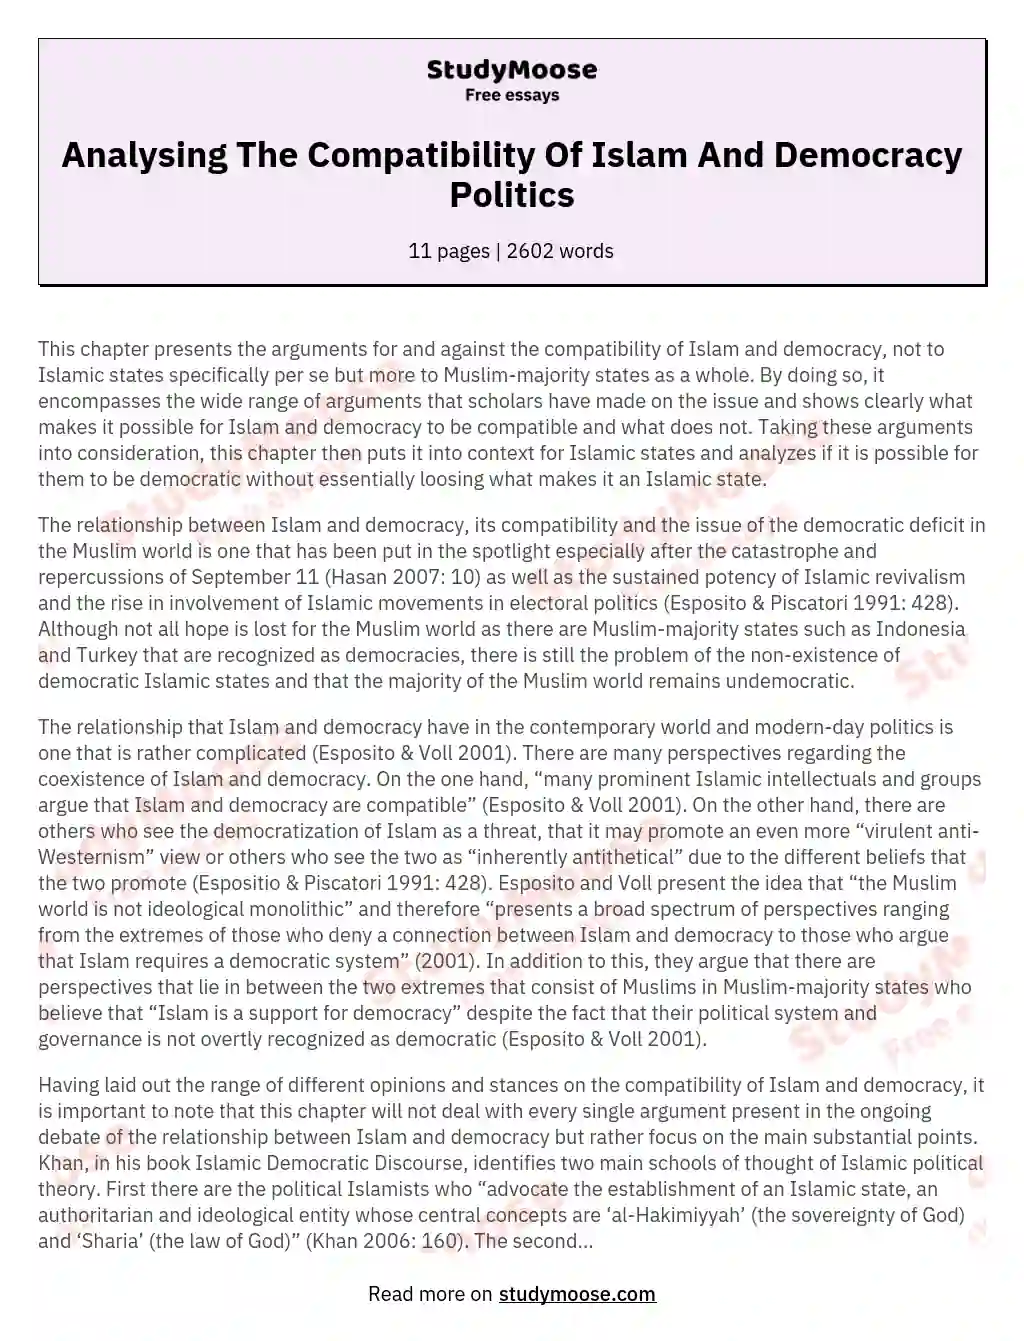 Analysing The Compatibility Of Islam And Democracy Politics essay